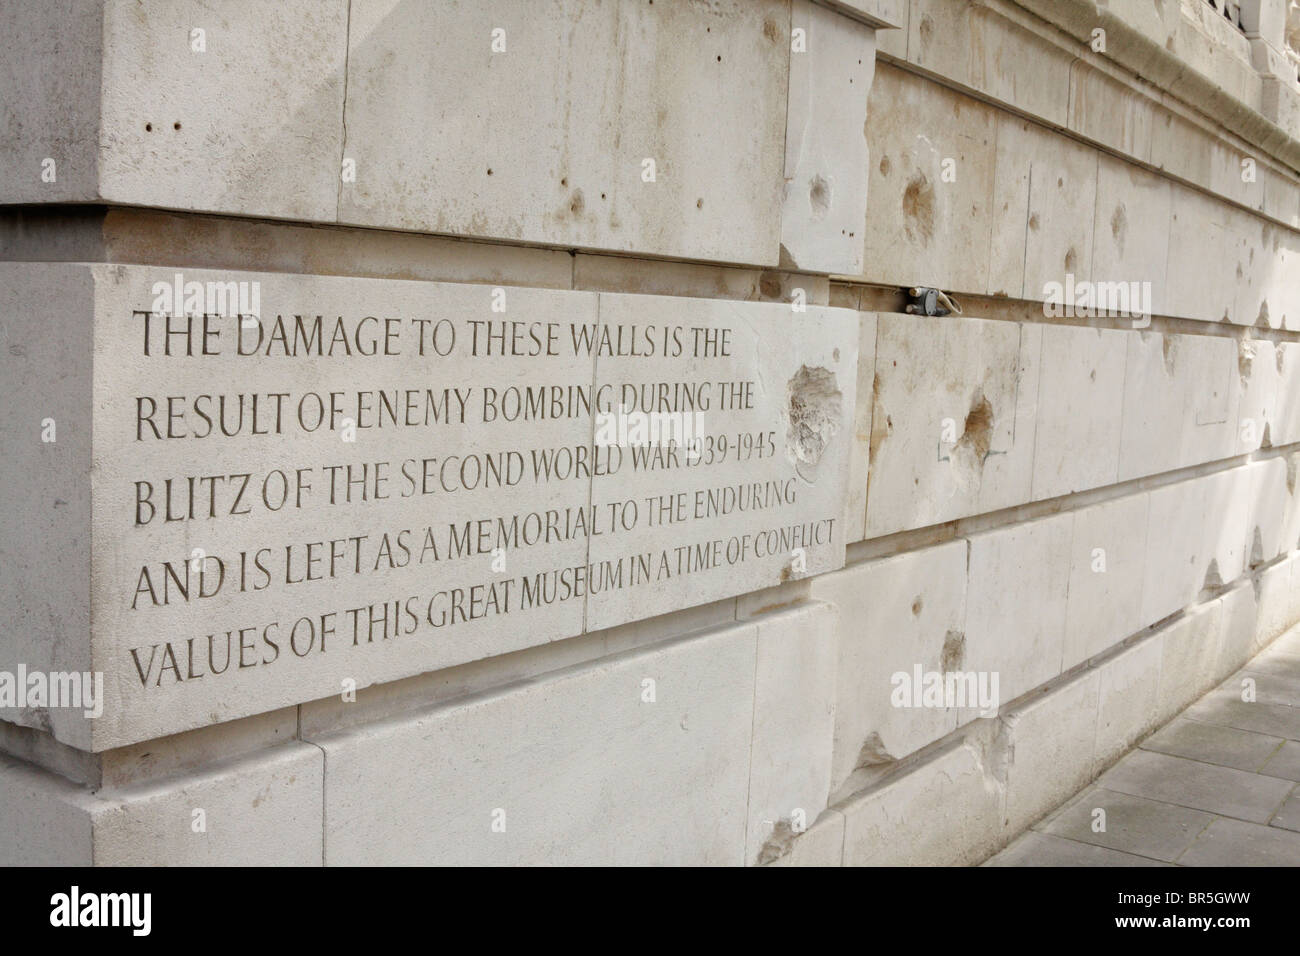 Detail of the Blitz damaged wall memorial of the Victoria and Albert Museum, London, UK Stock Photo